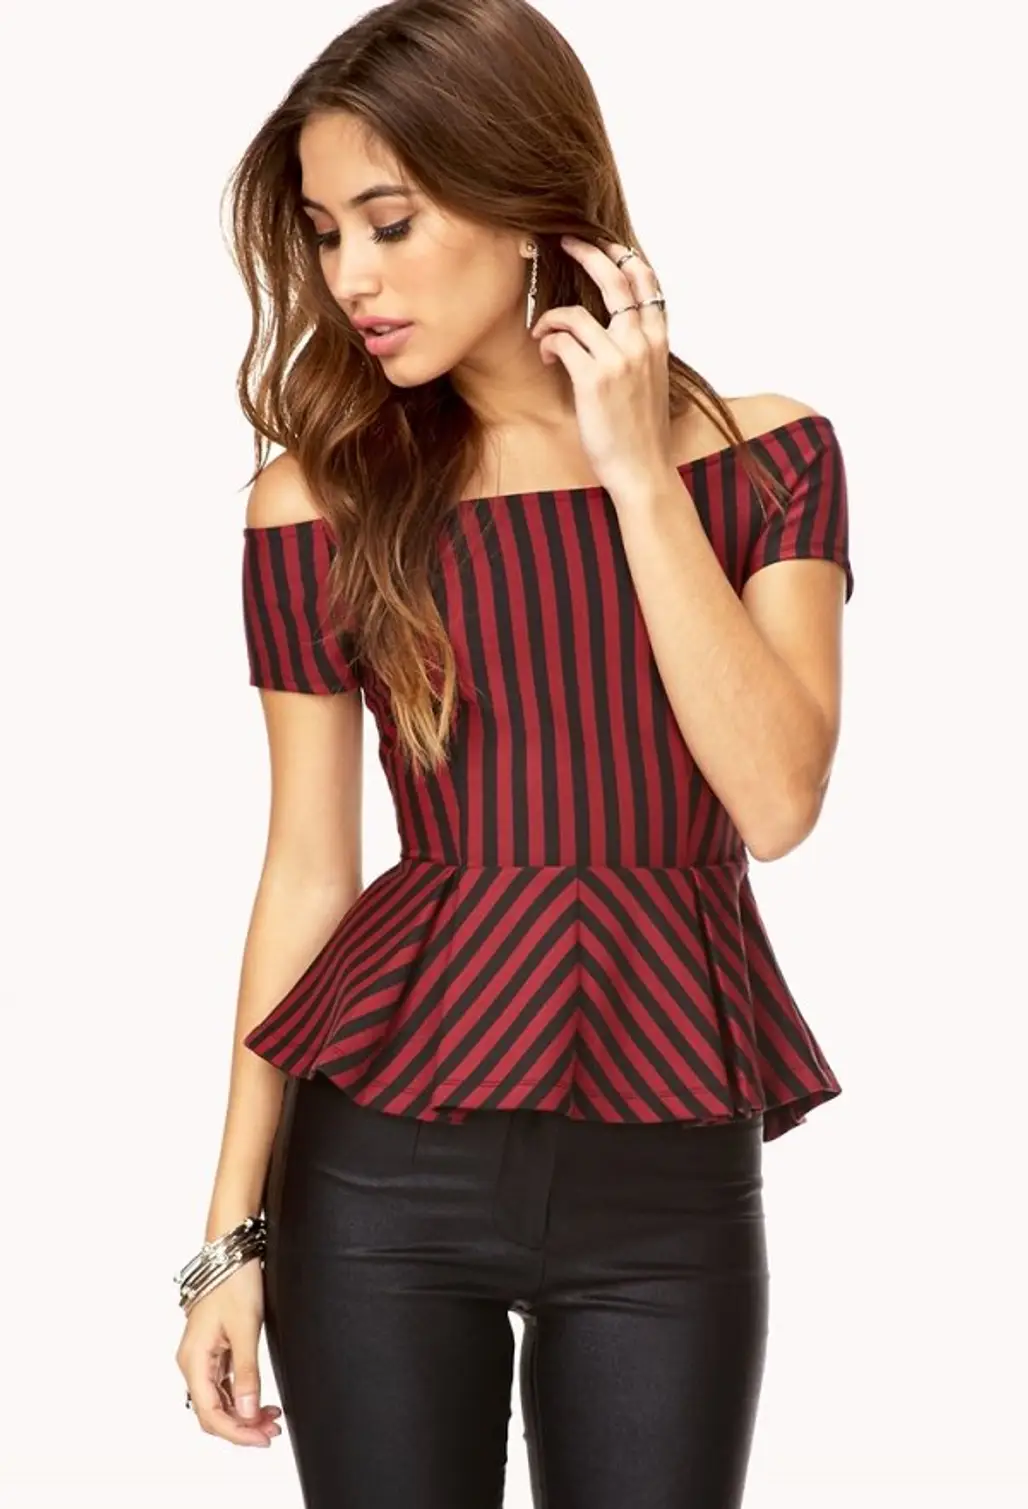 Forever 21 – SOPHISTICATED Stripes Peplum Top